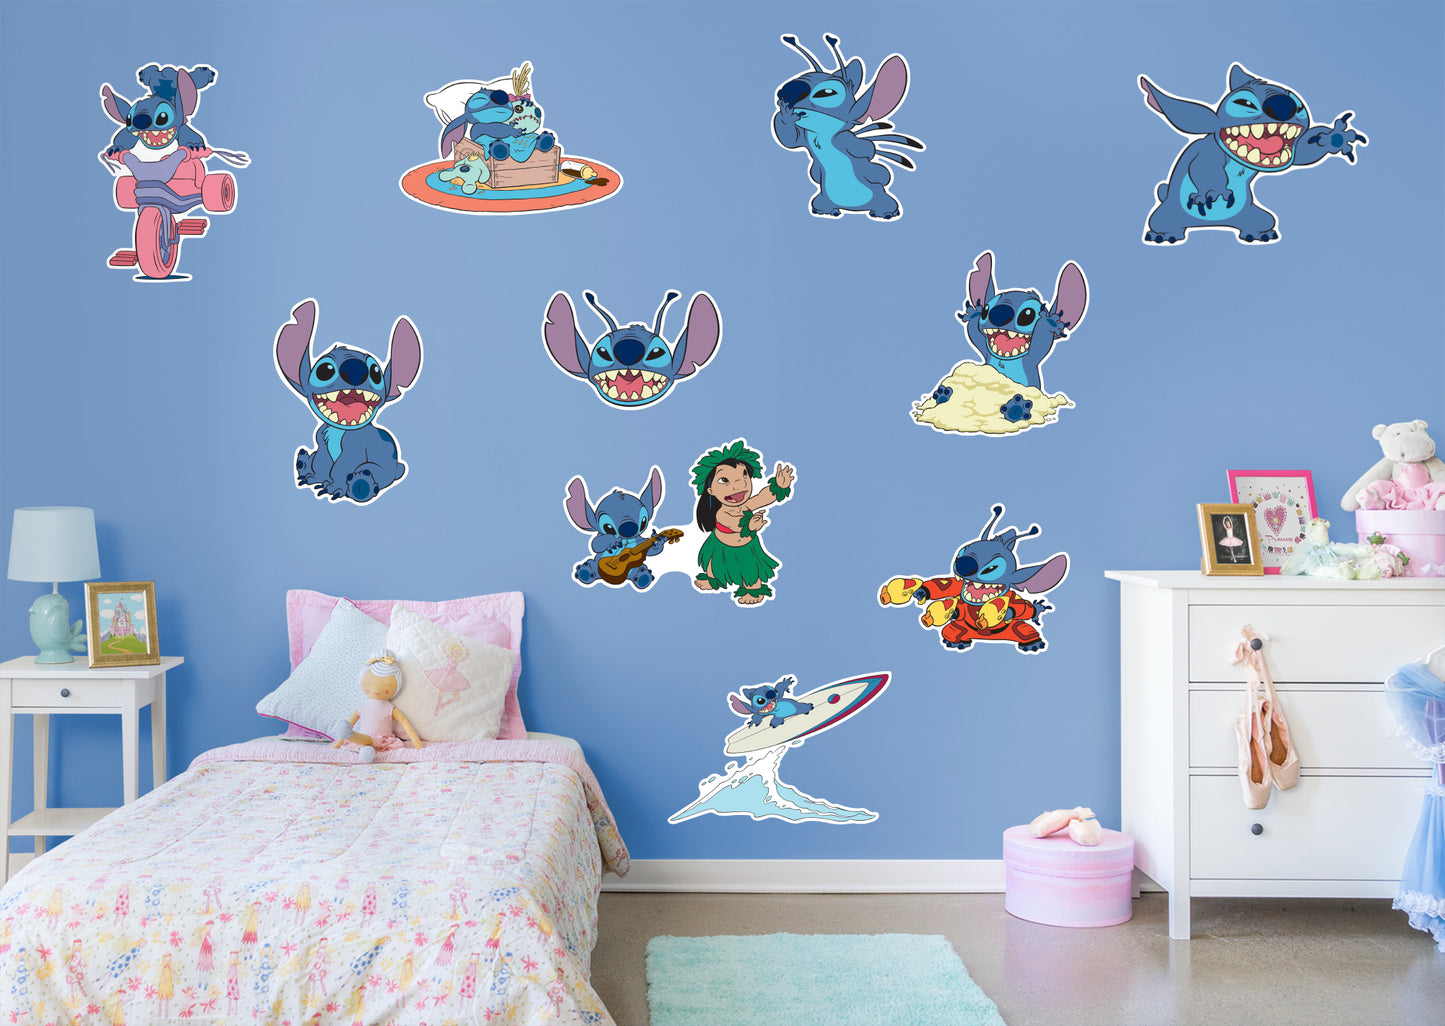 Lilo & Stitch: Stitch Collection - Disney Removable Adhesive Wall Decal 10 Wall Decals 24W x 16H